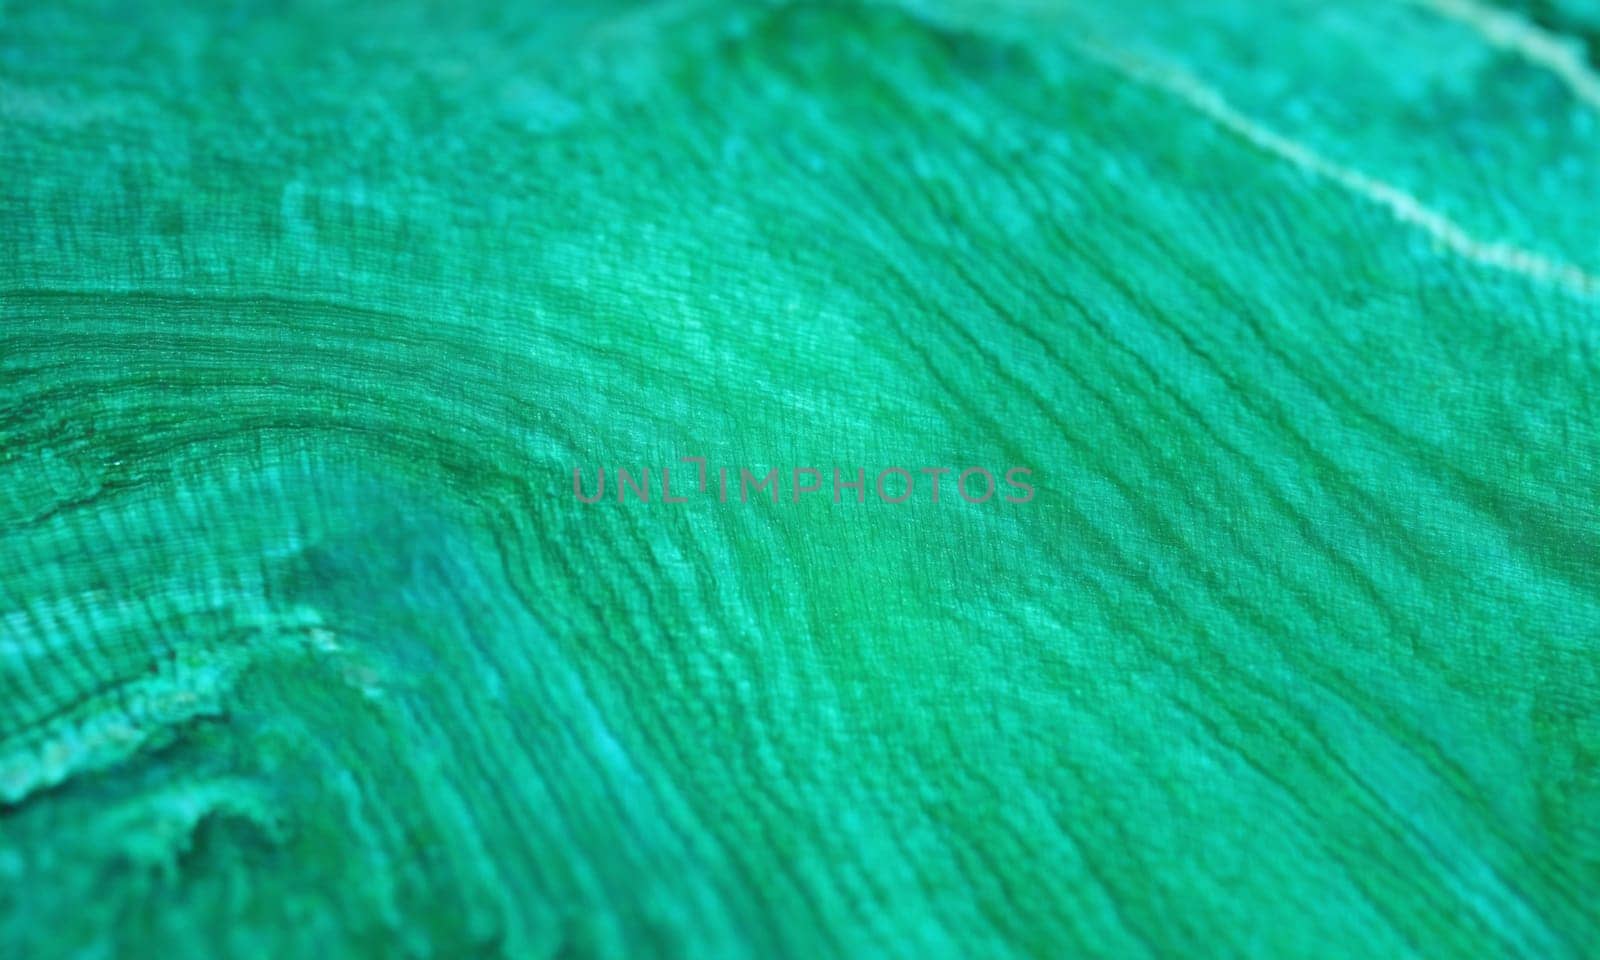 Emerald green natural stone texture background. Close up of emerald gemstone.